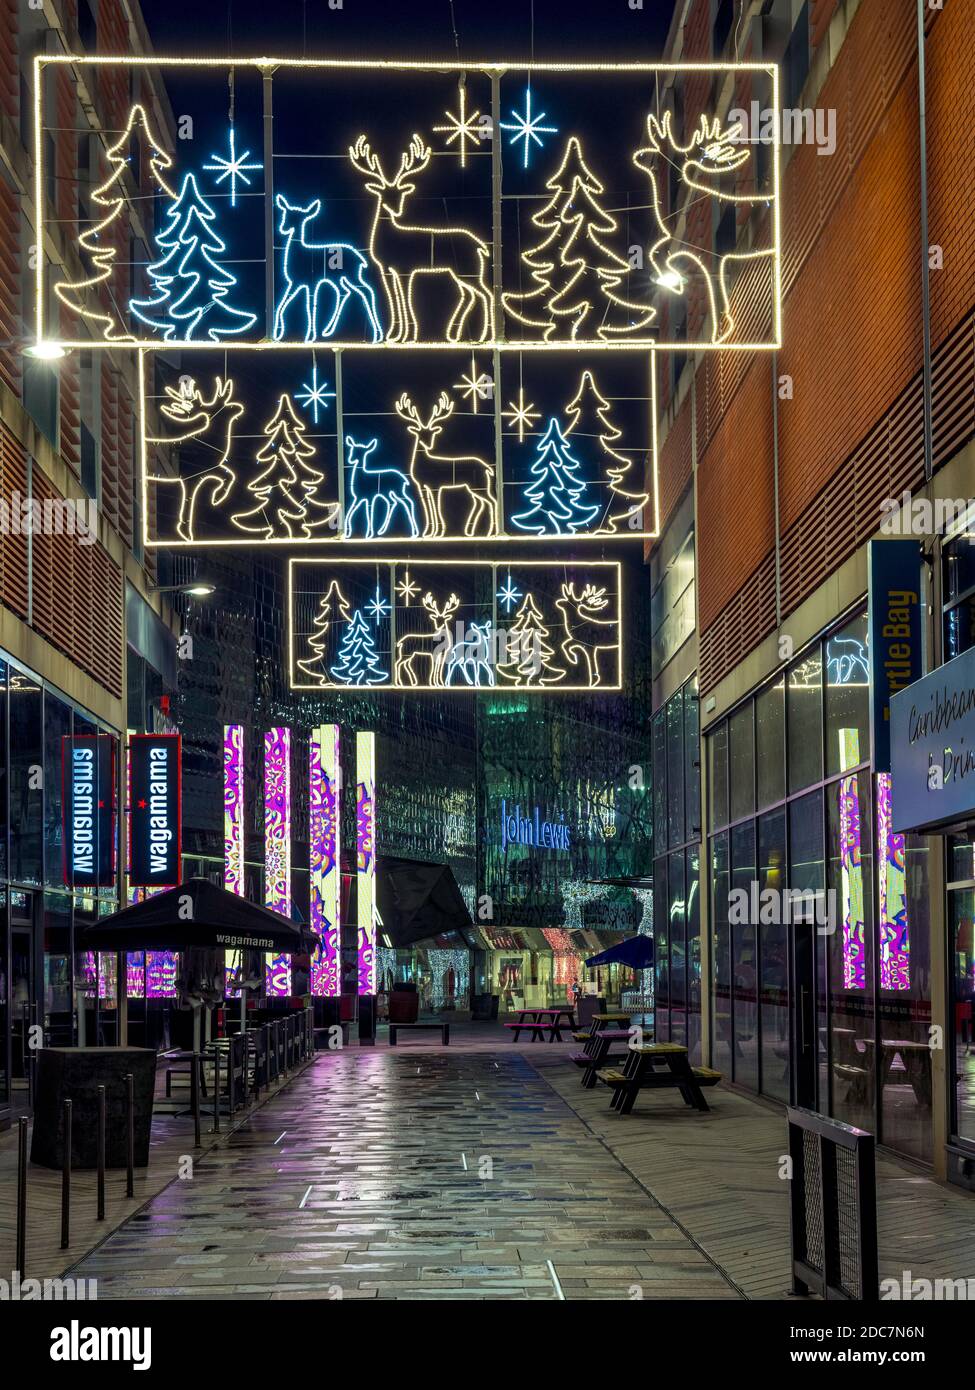 Christmas decorations and the Beacons Digital Sculpture in St. Peter's Square at Highcross shopping centre in Leicester Stock Photo